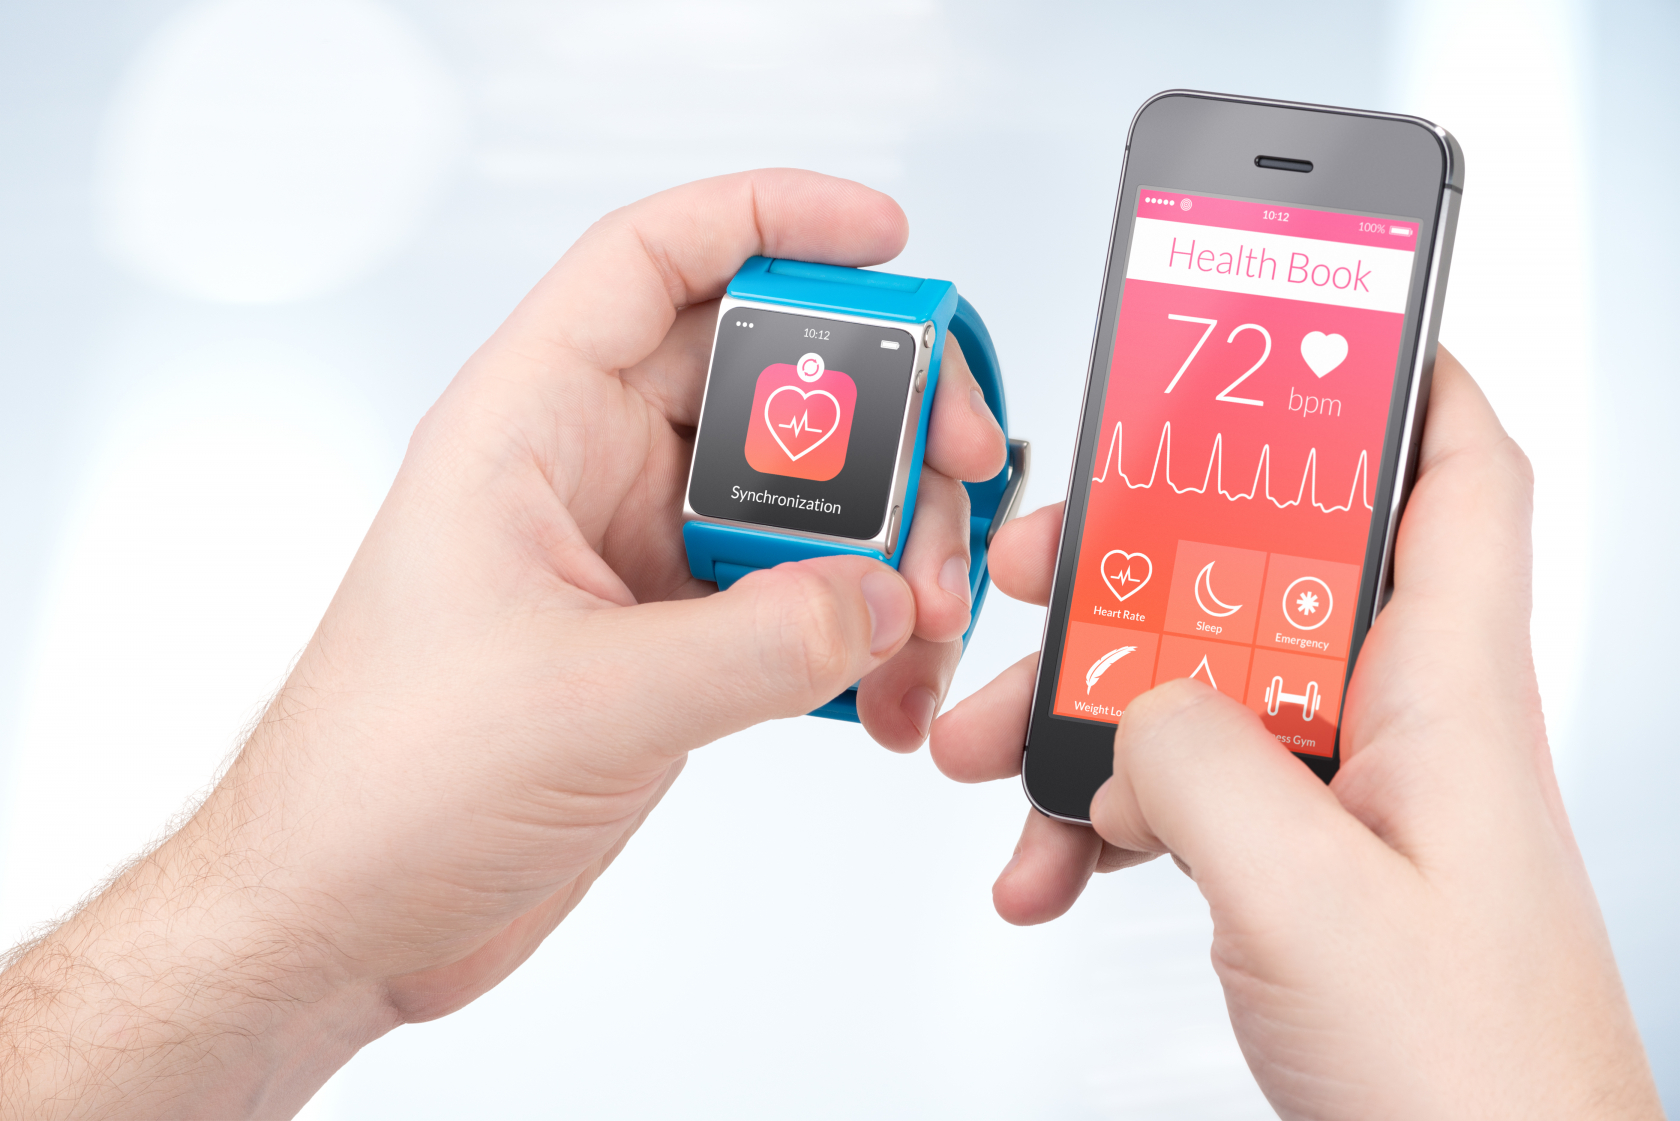 Opinion: The myth of general purpose wearables